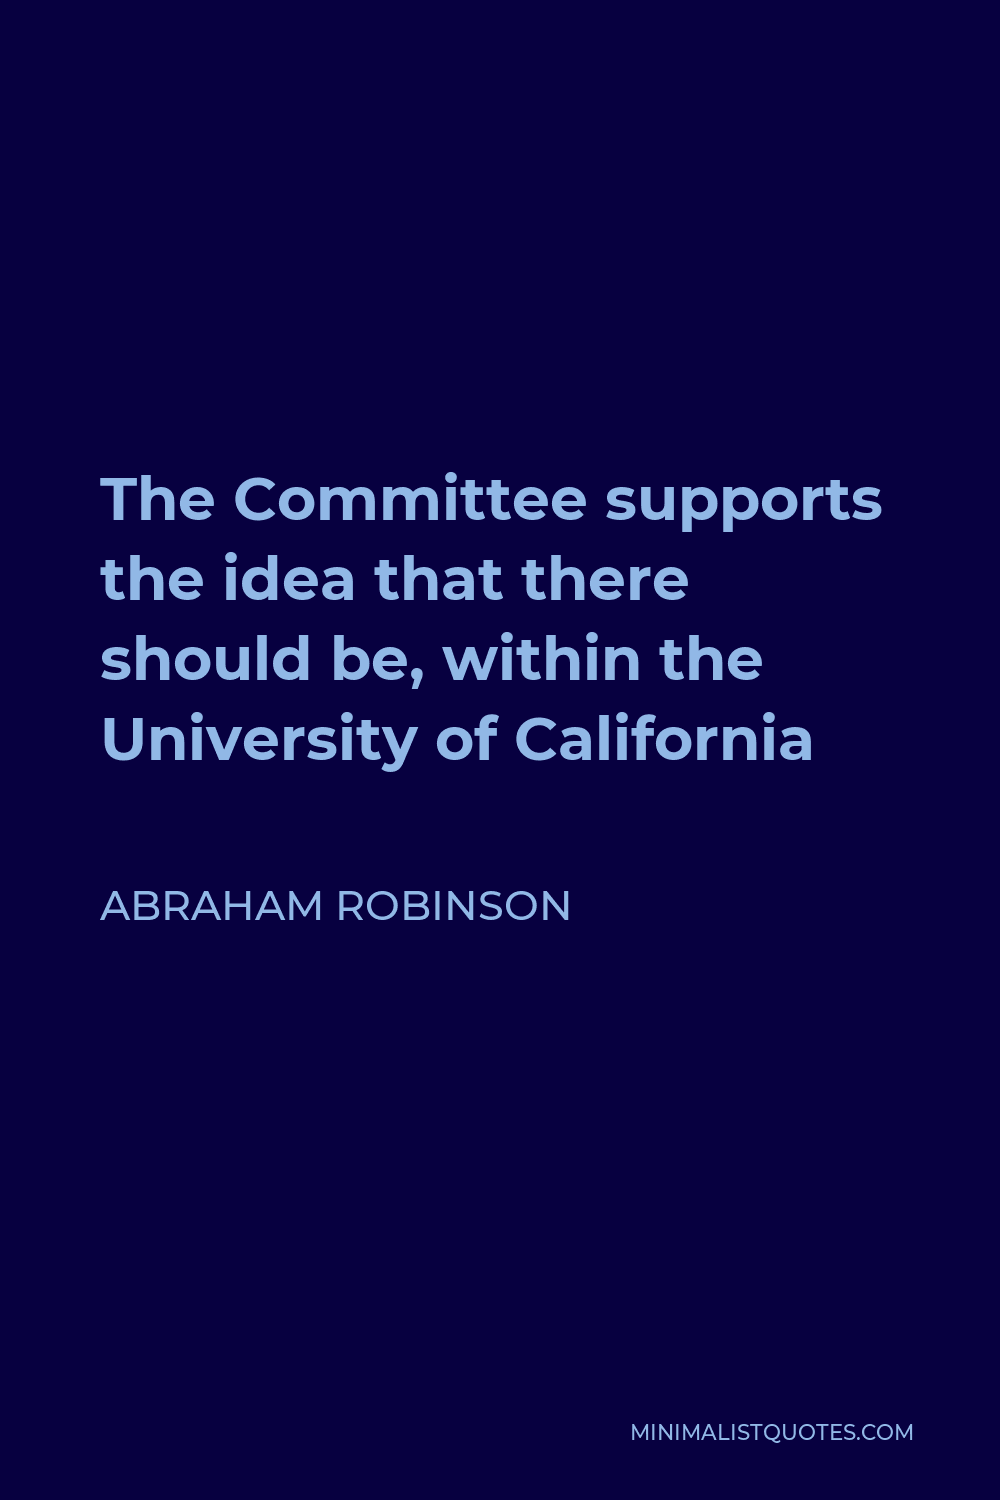 Abraham Robinson Quote - The Committee supports the idea that there should be, within the University of California